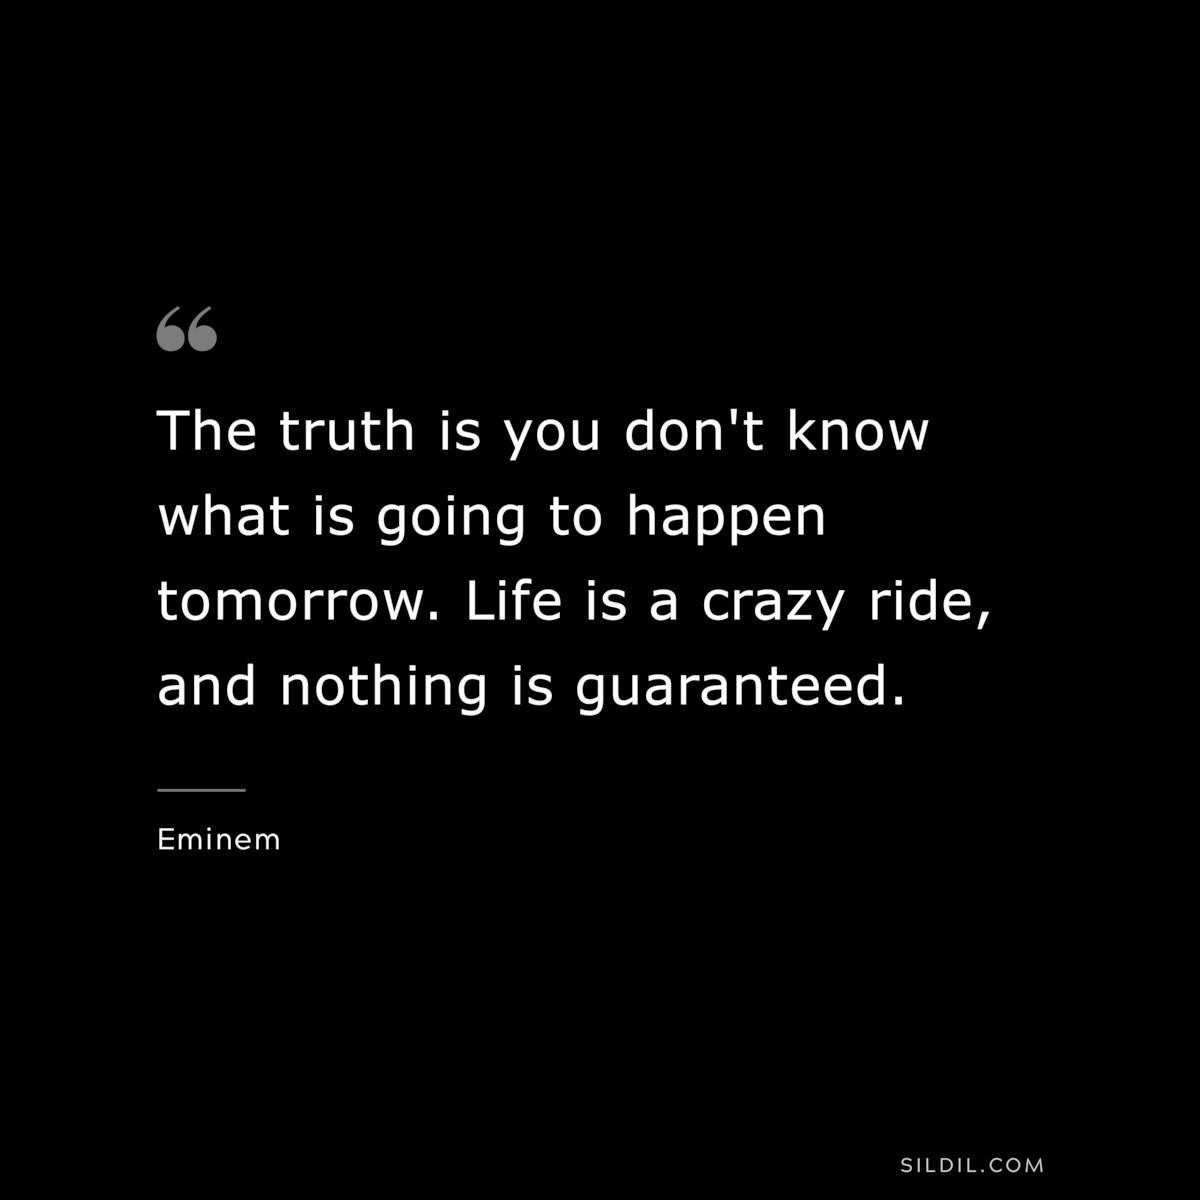 The truth is you don't know what is going to happen tomorrow. Life is a crazy ride, and nothing is guaranteed. ― Eminem